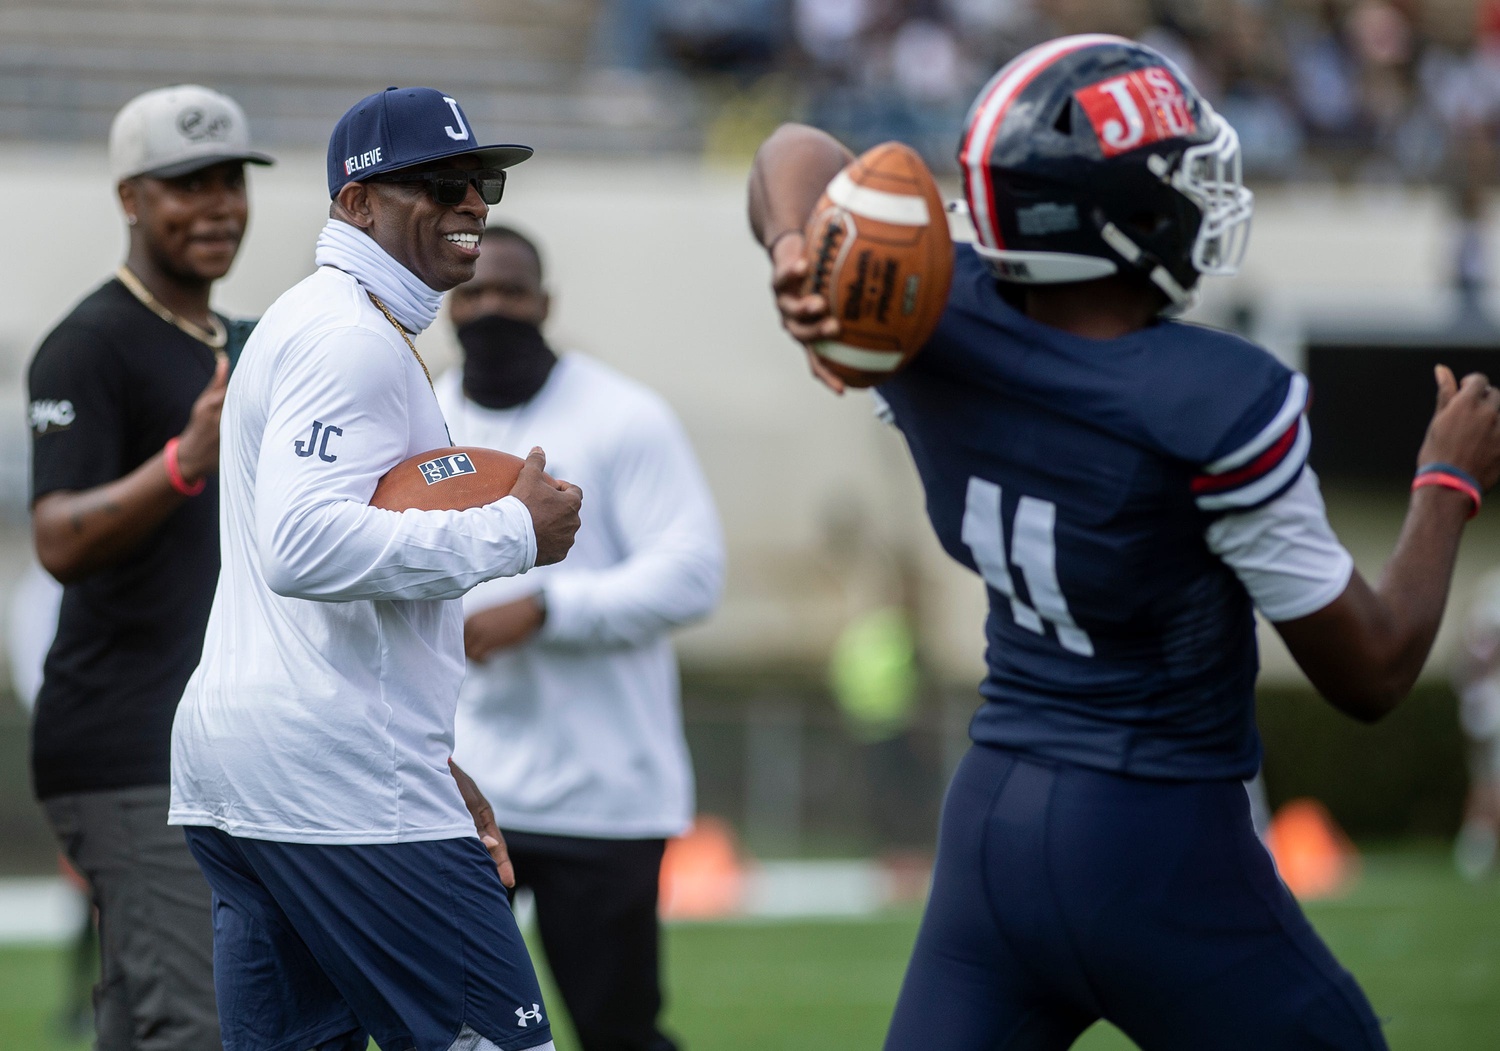 Coach Deion Sanders is Good for all of College Football - HBCU Legends